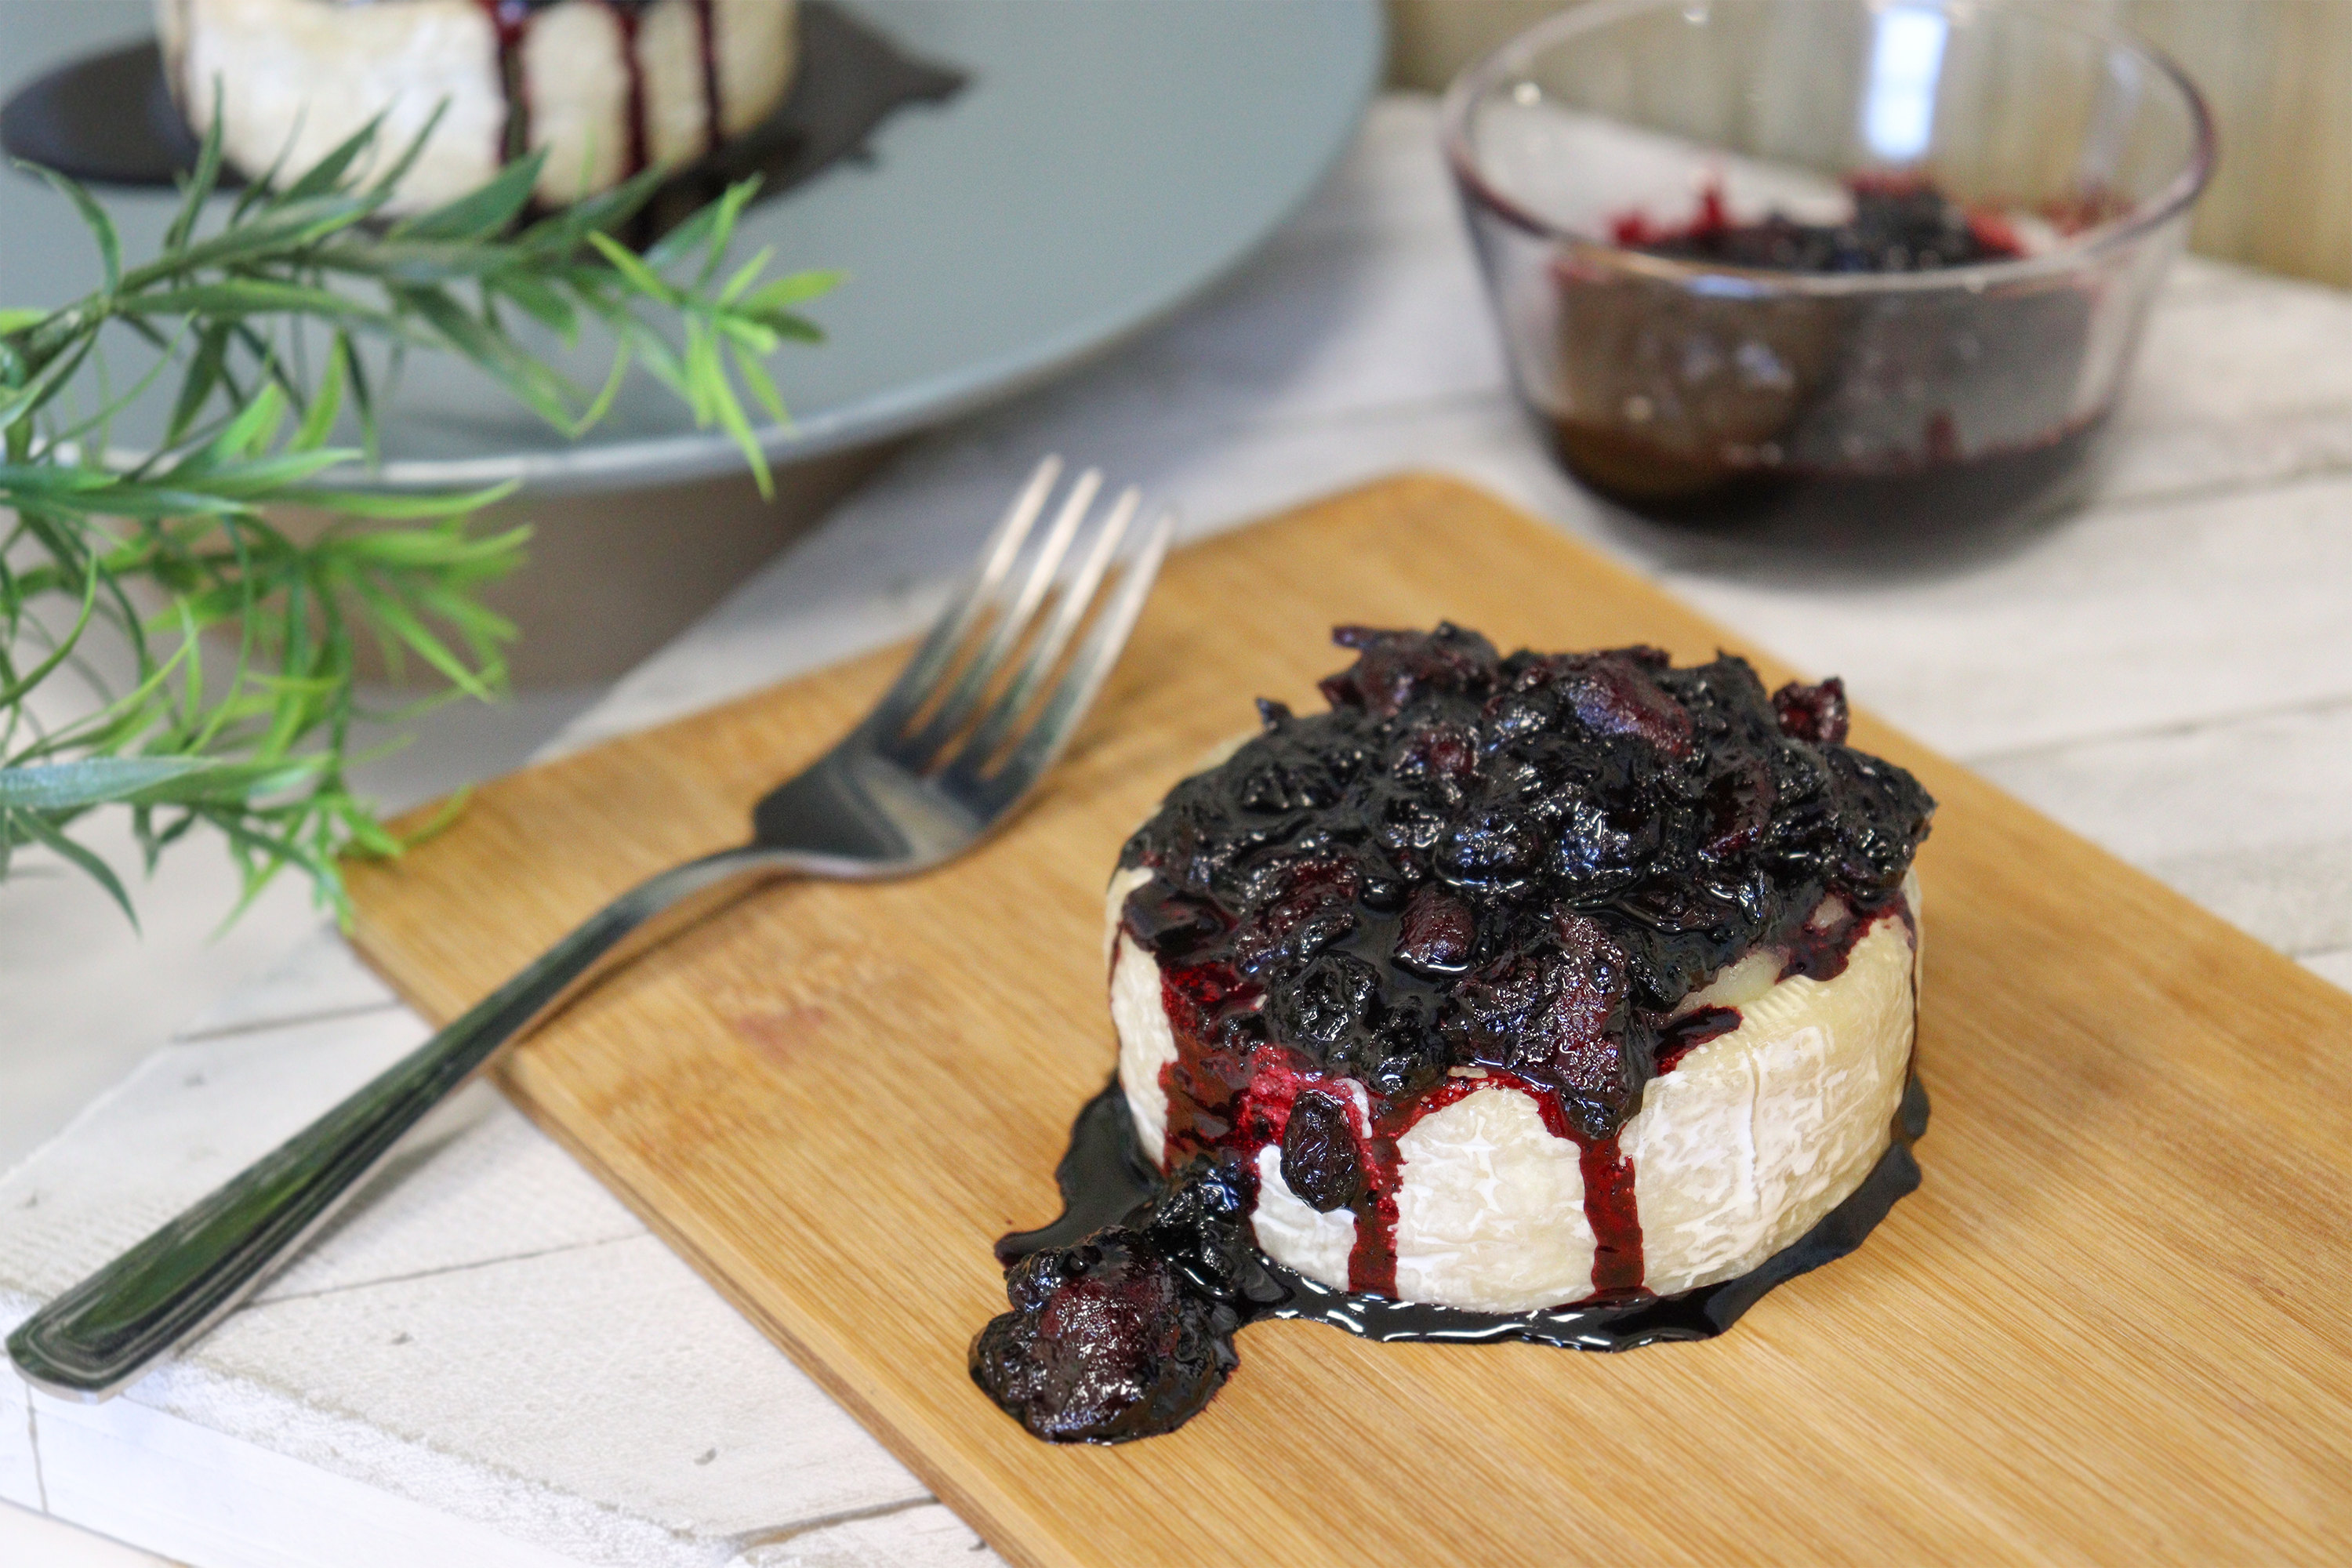 Baked brie cheese topped with bacon & haskap berries